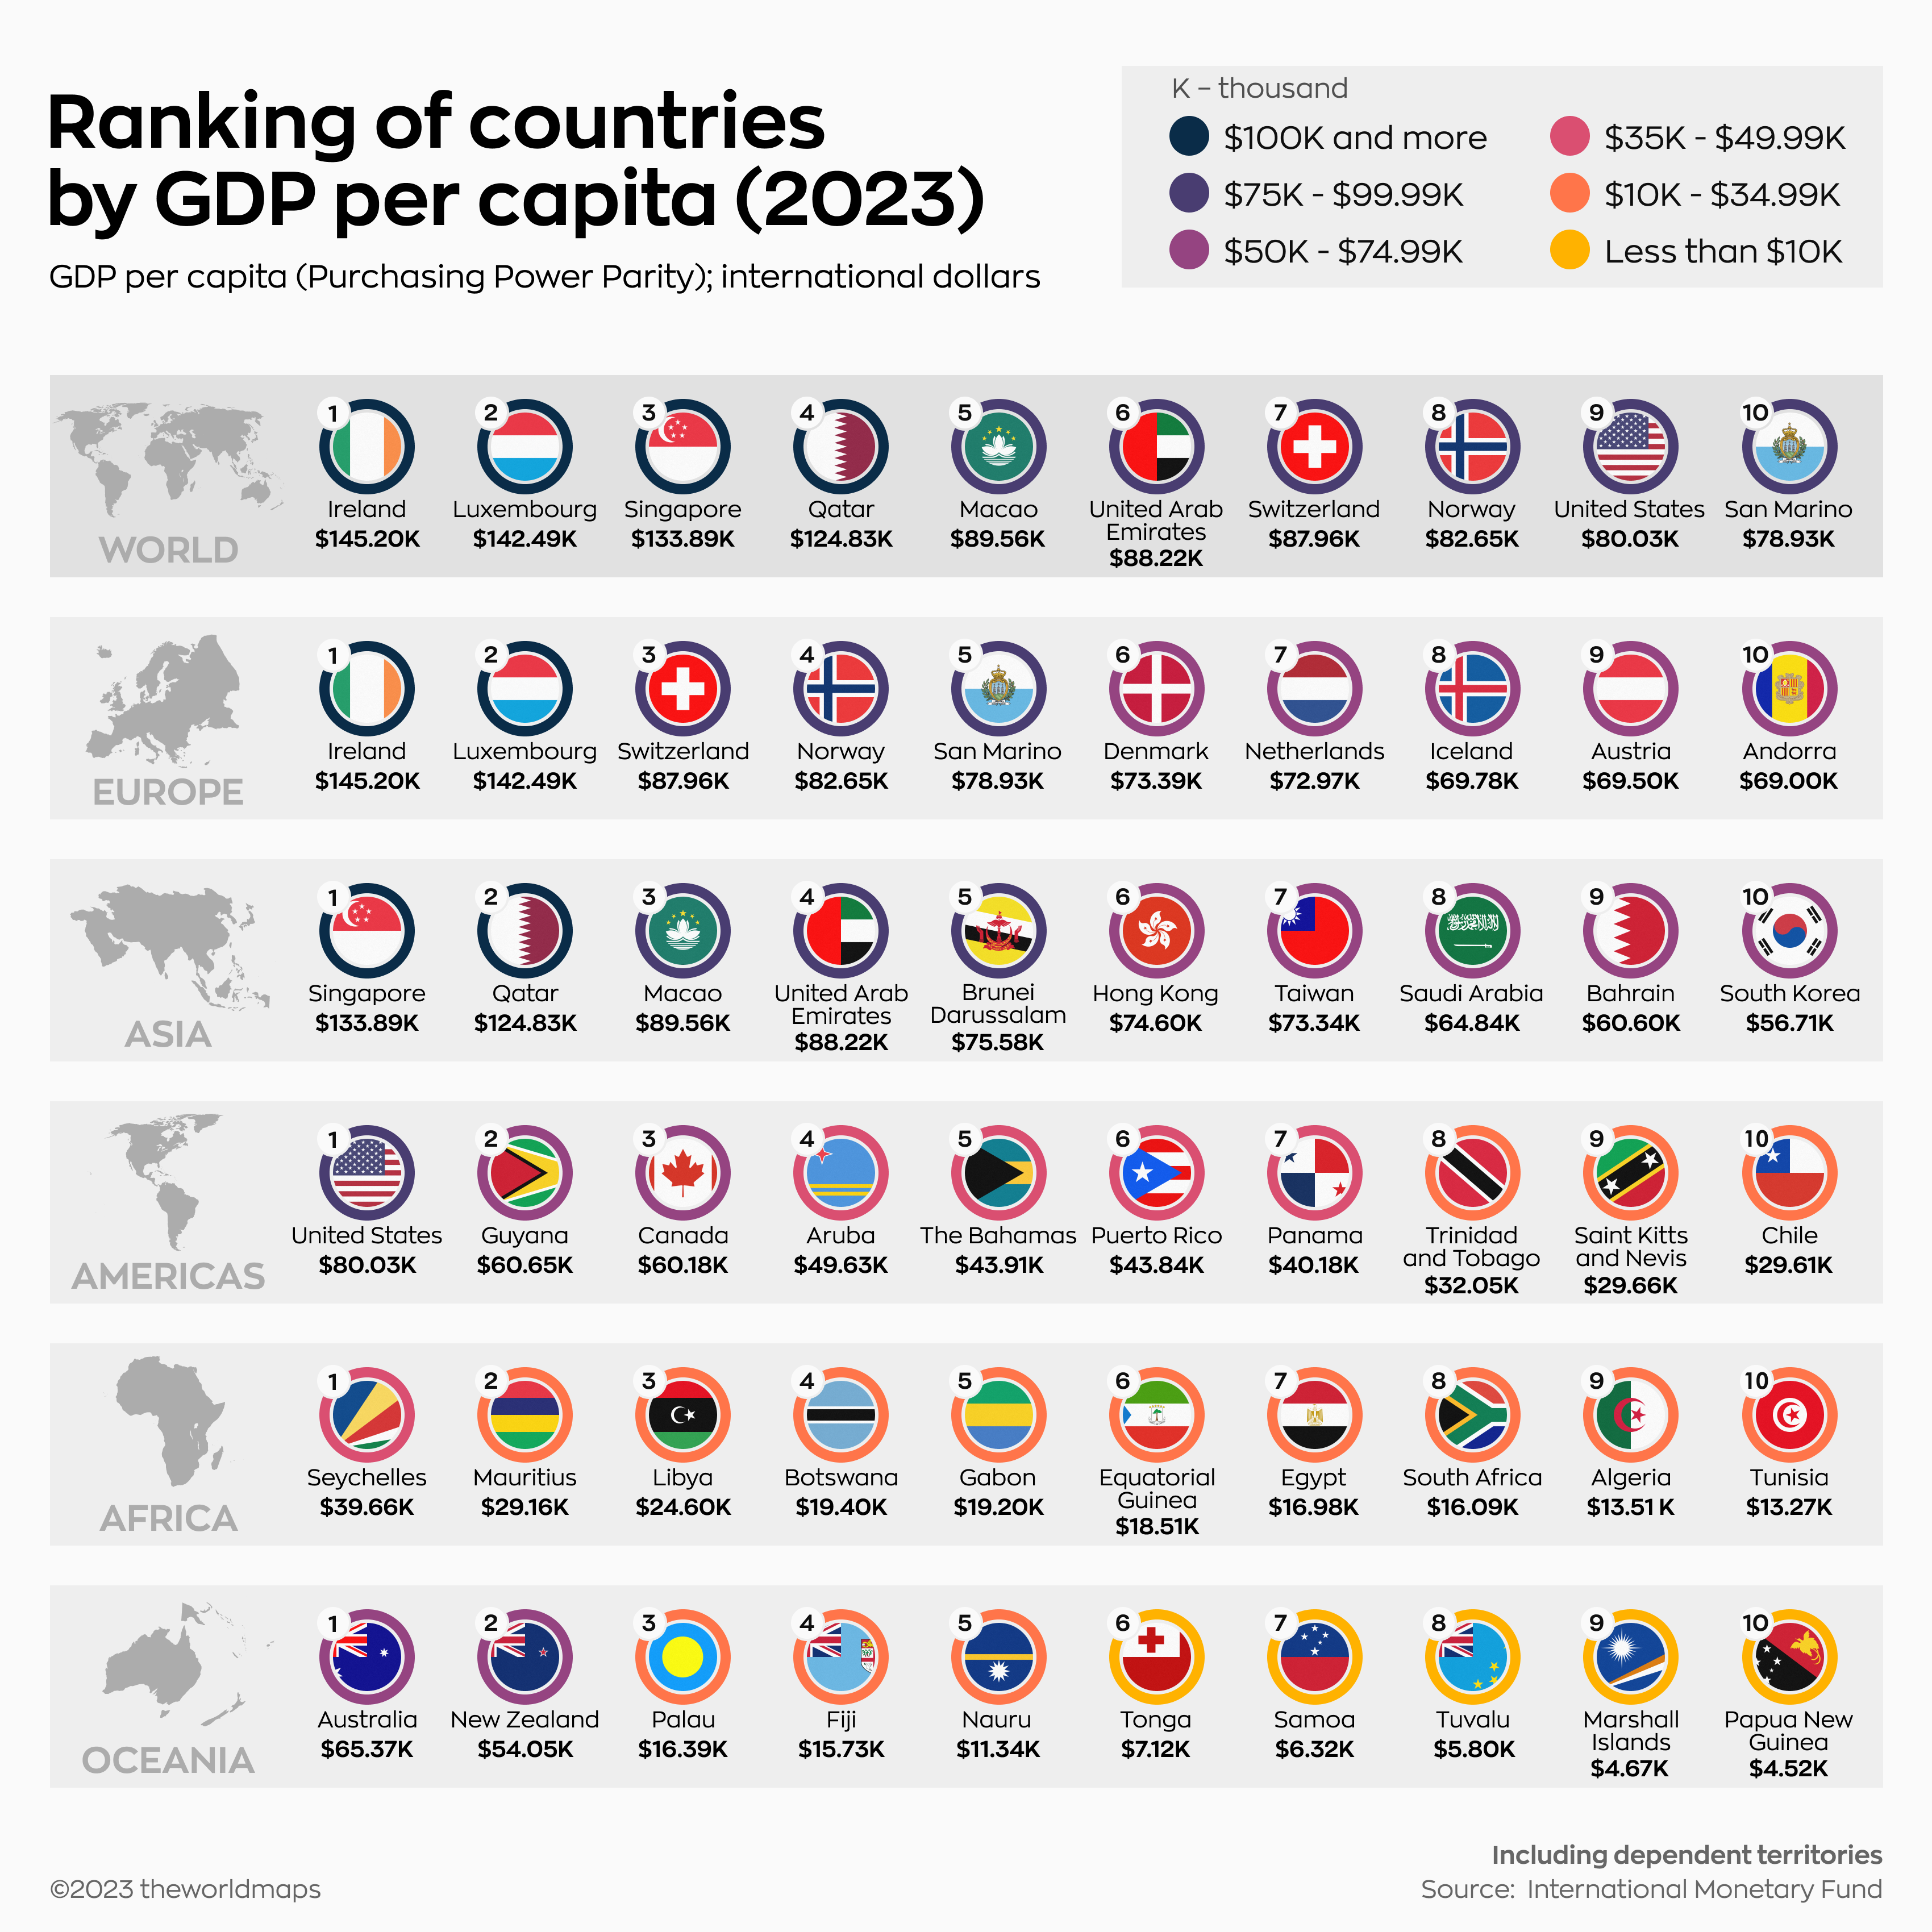 Ranked Top 10 Countries By GDP Per Capita, by Region in 2023